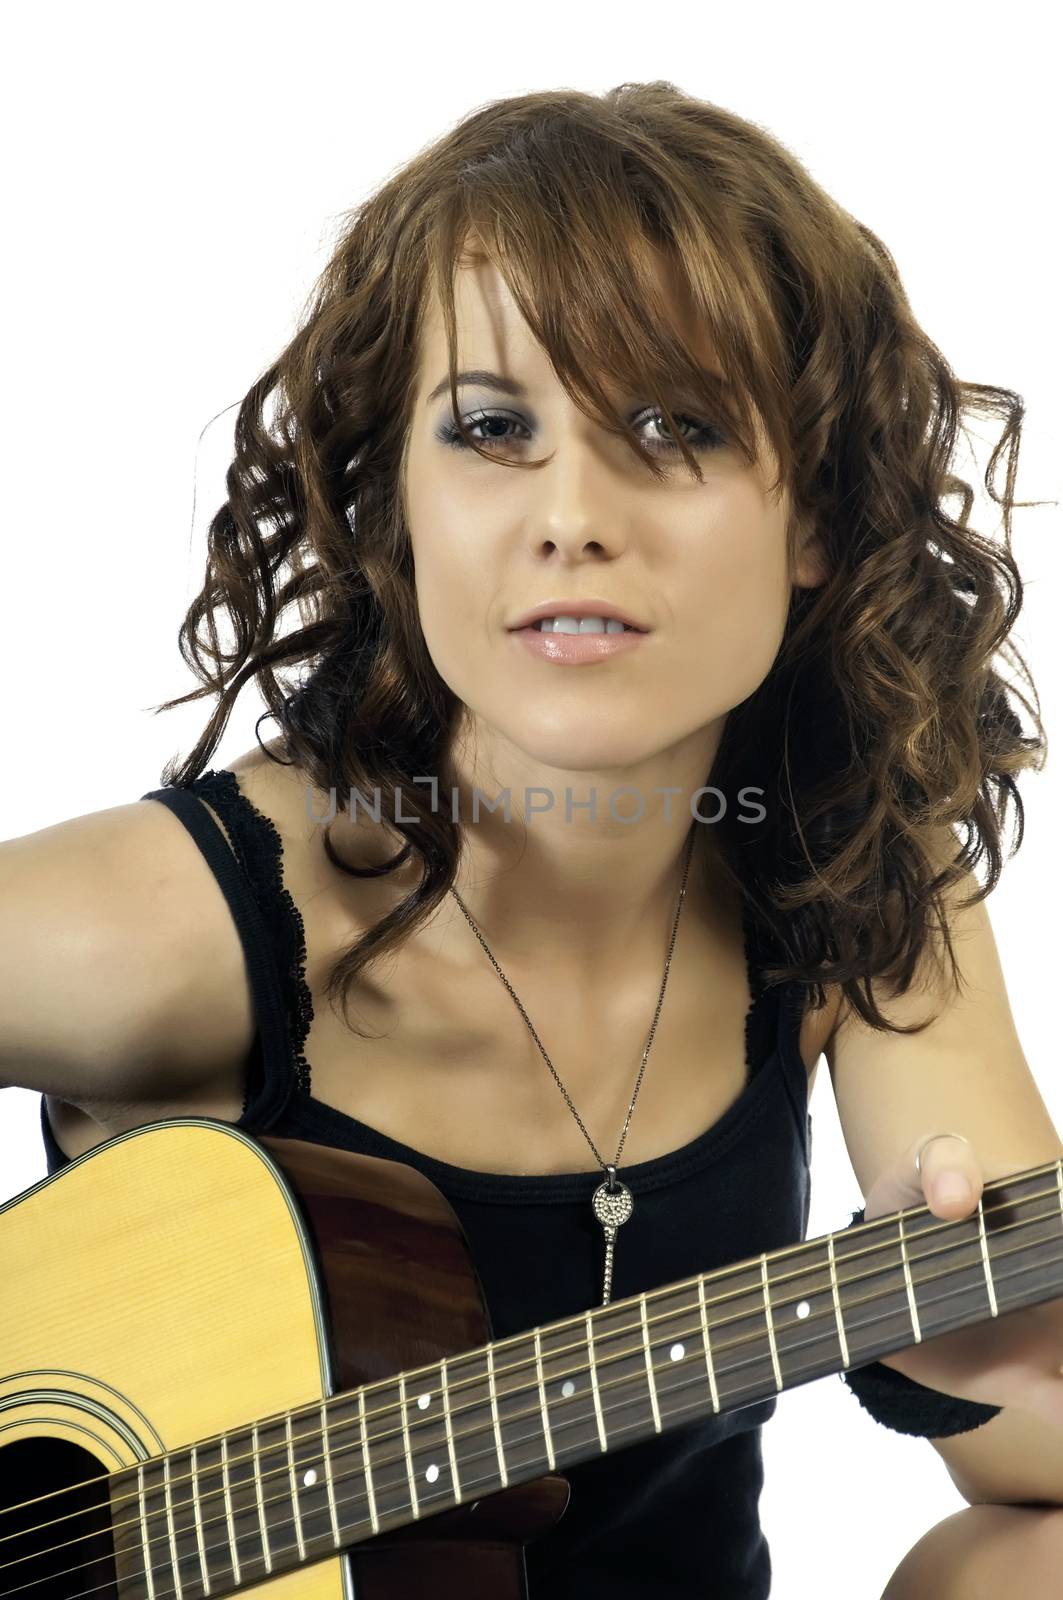 Pretty Brunette Guitar Player by rcarner